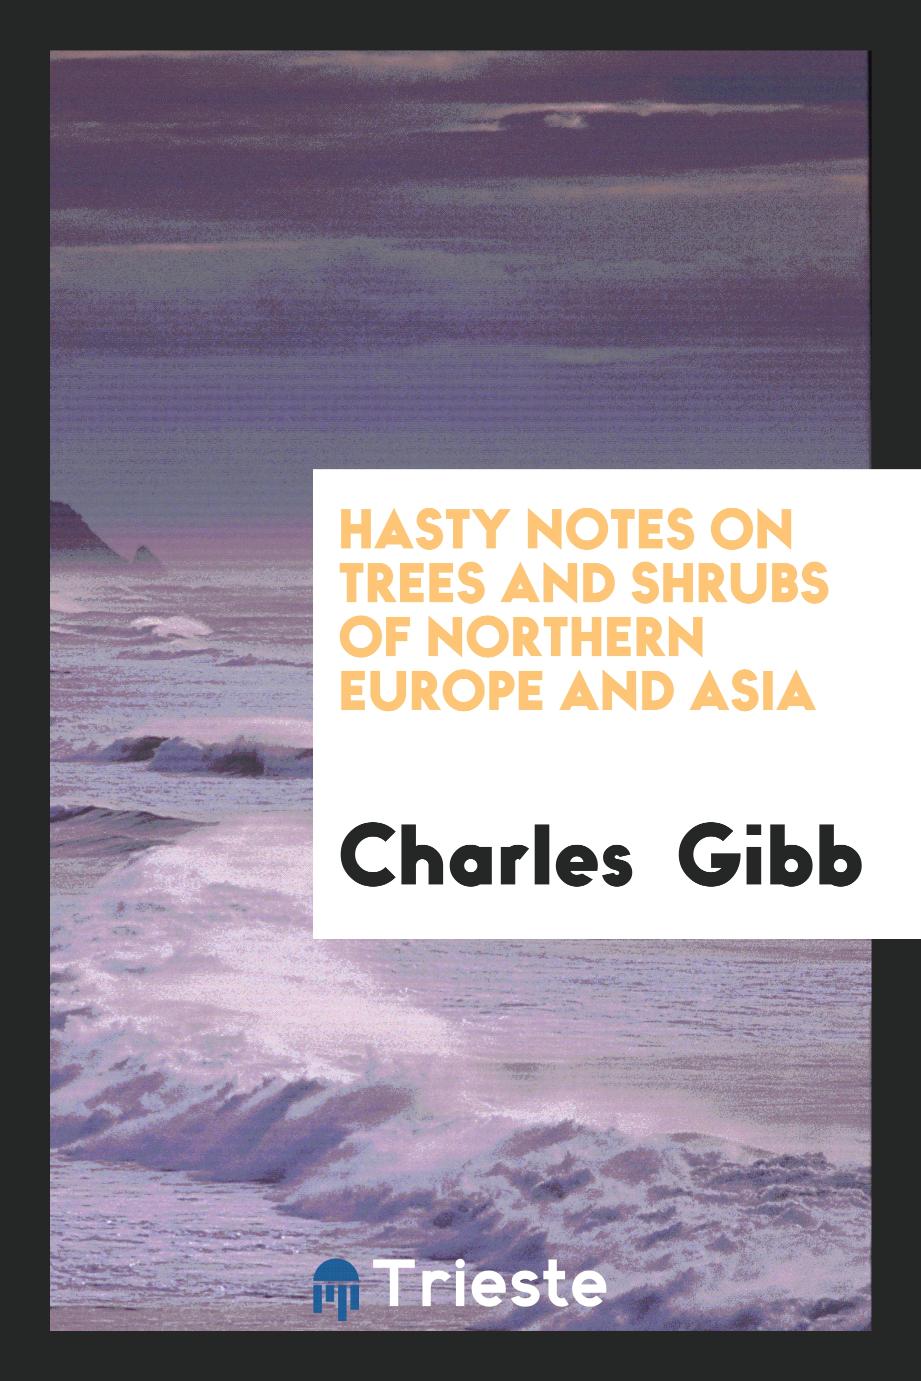 Hasty notes on trees and shrubs of northern Europe and Asia